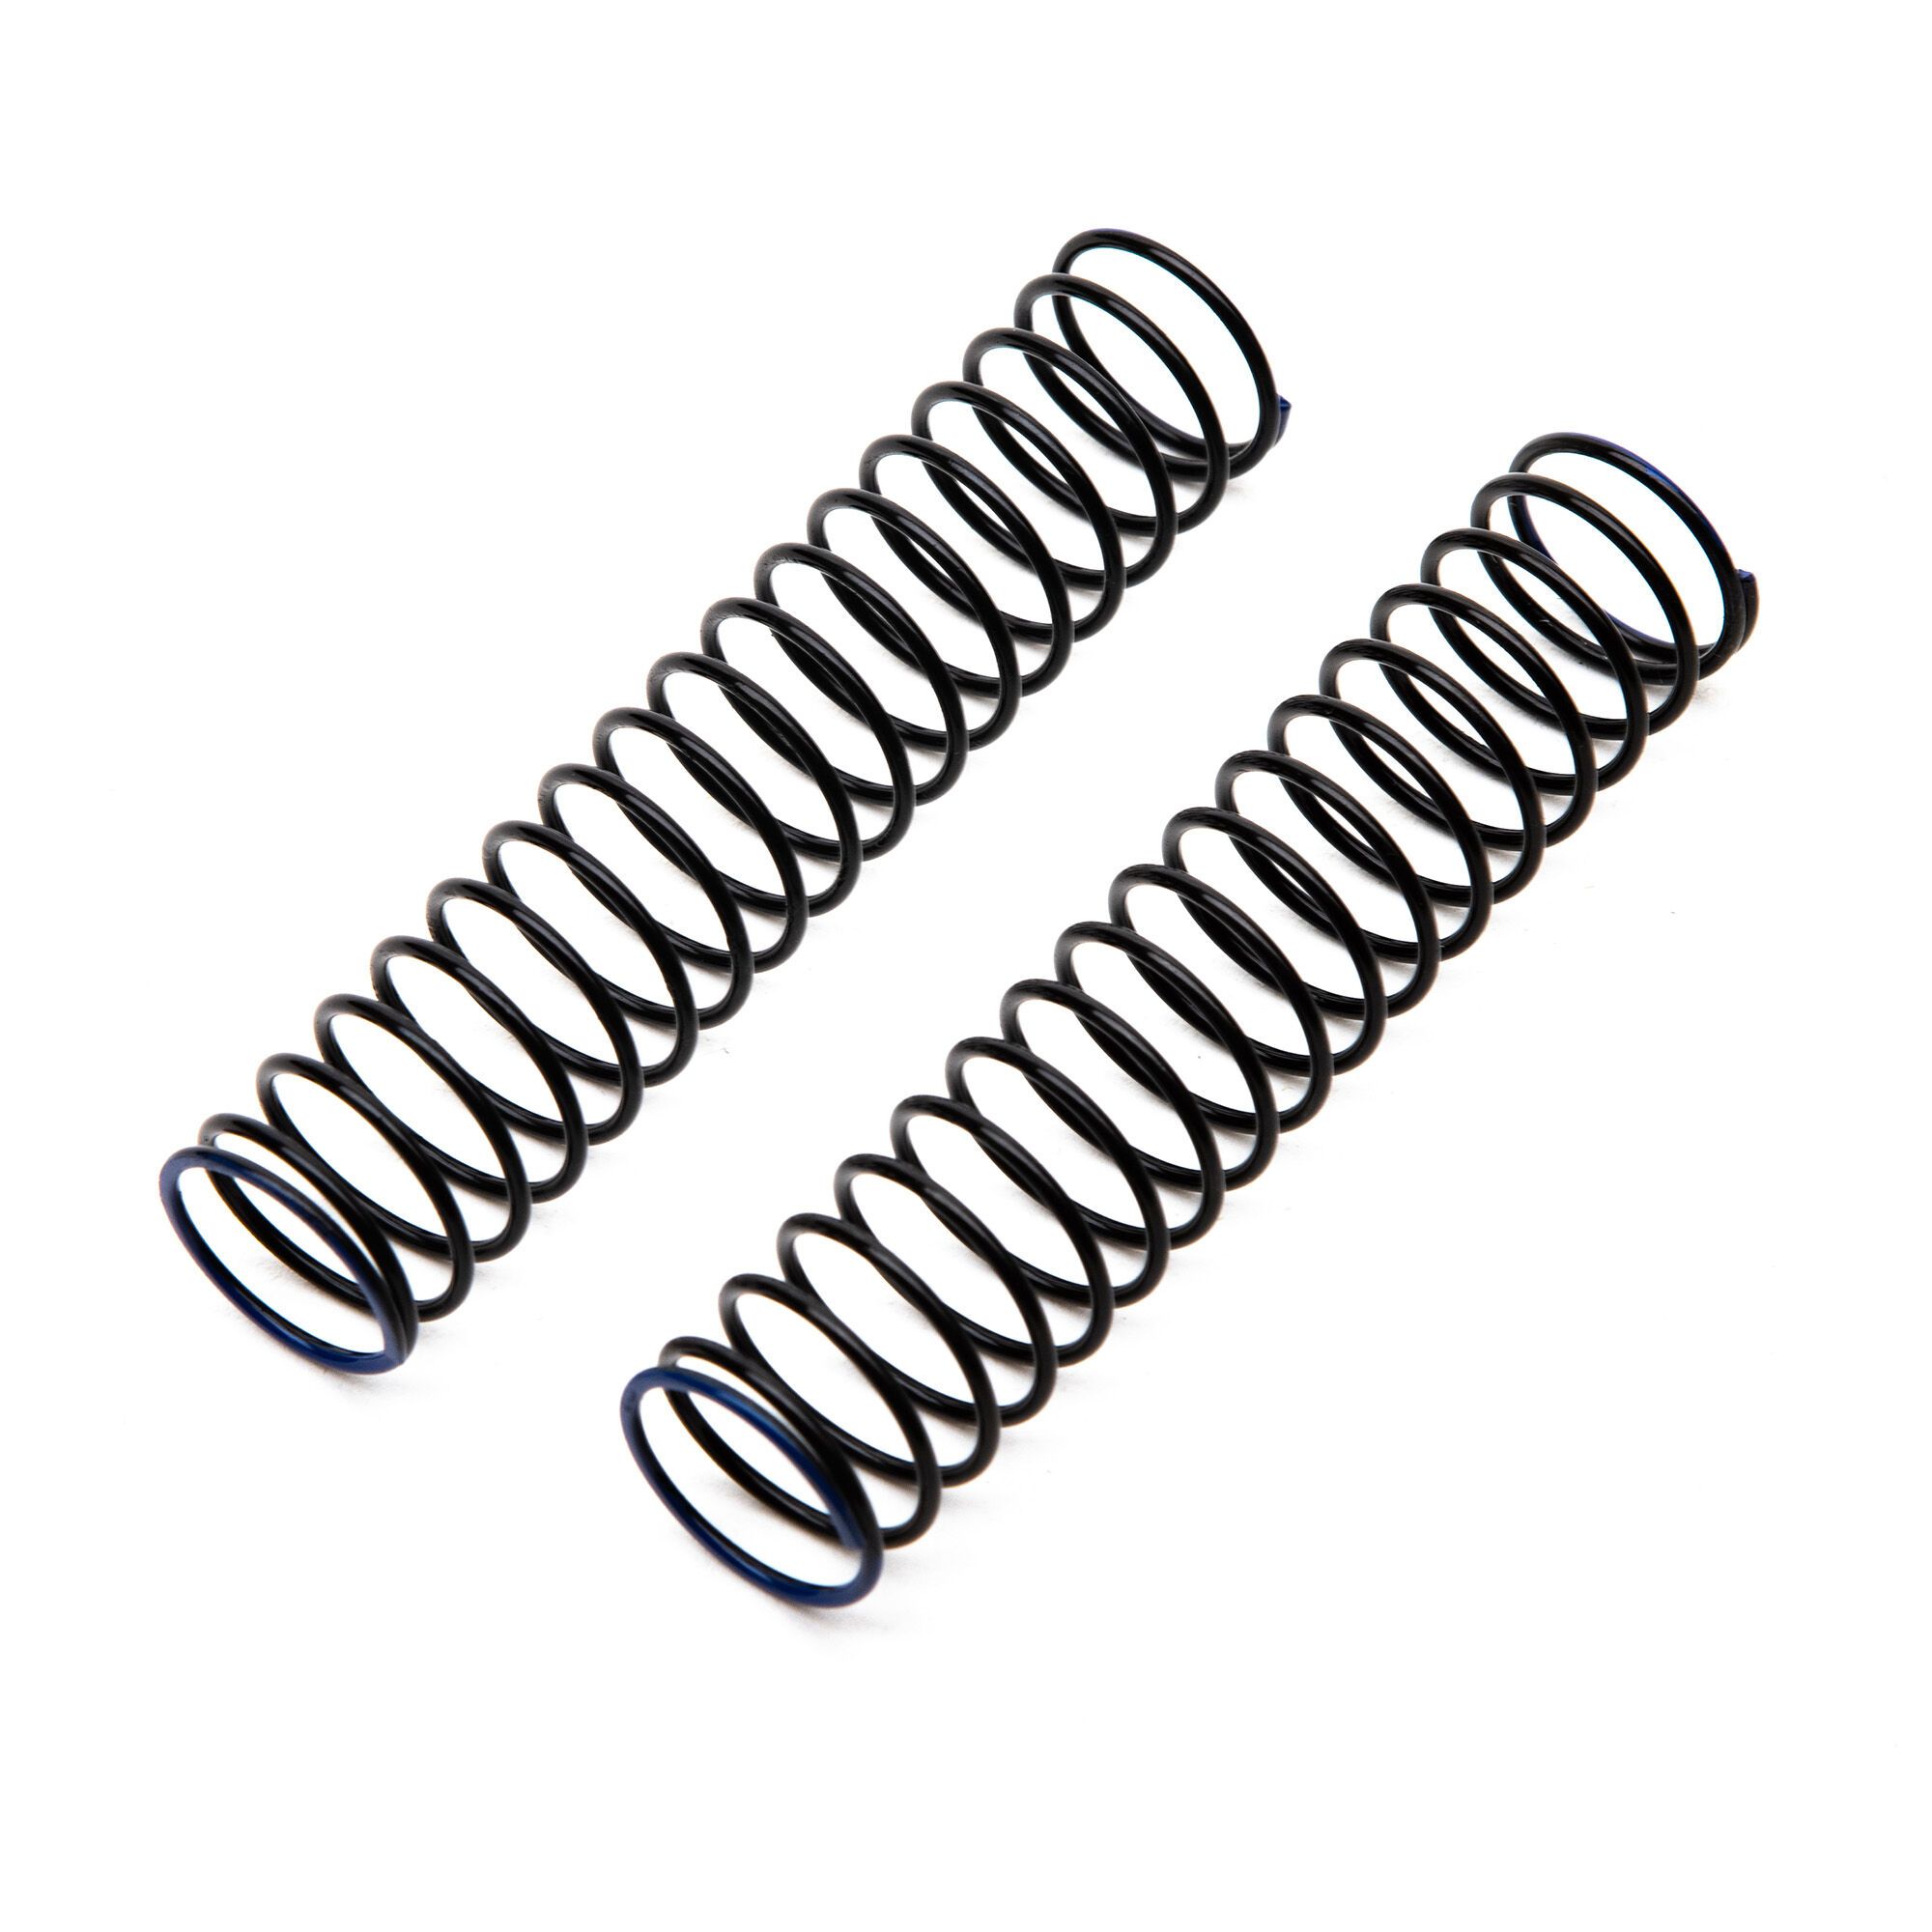 Axial Spring, 15x85mm 1.95lbs/in Purple (2) Z-AXI333001